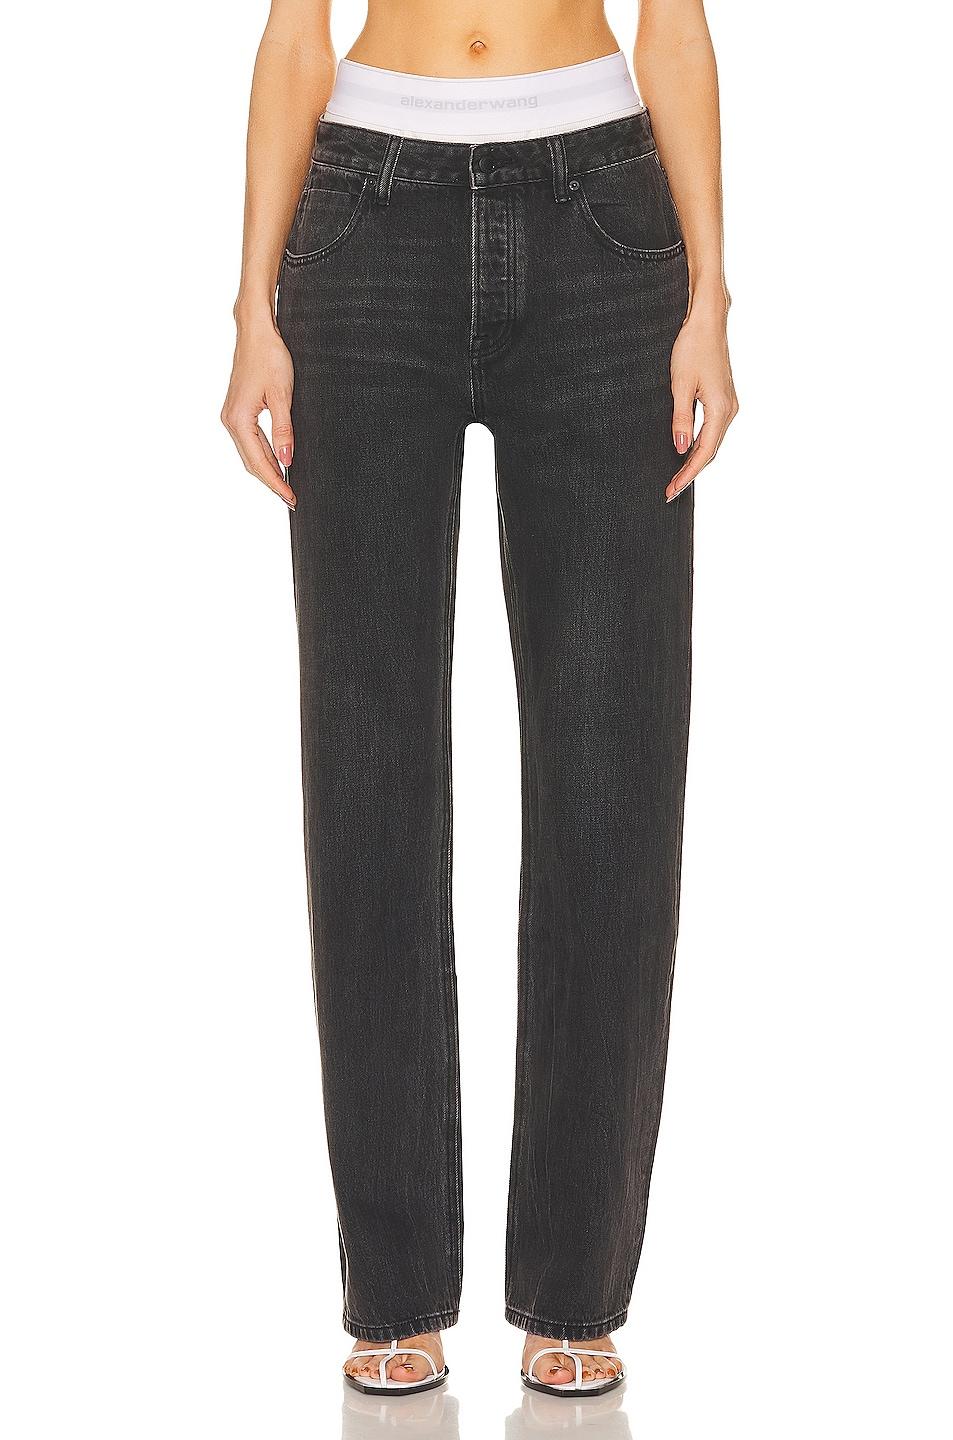 Alexander Wang Cotton Underwear Low Rise Straight Pant in Black | Lyst